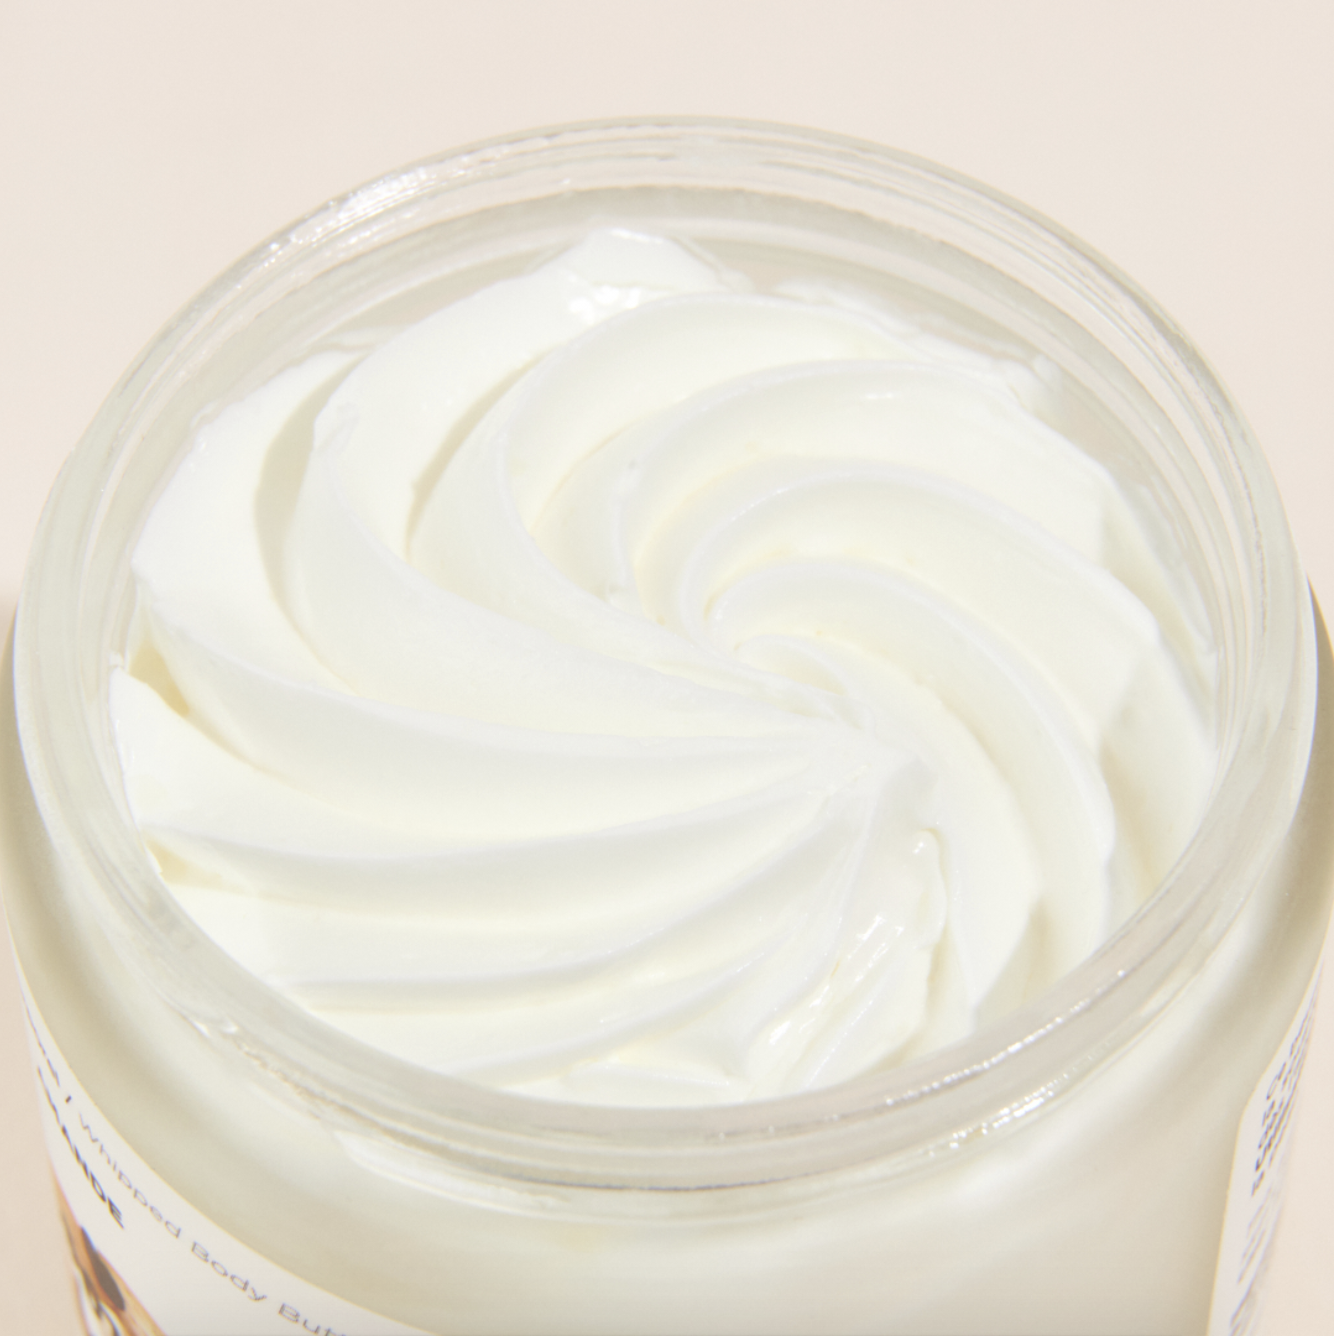 Cocooning love Whipped Body Butter – Almond